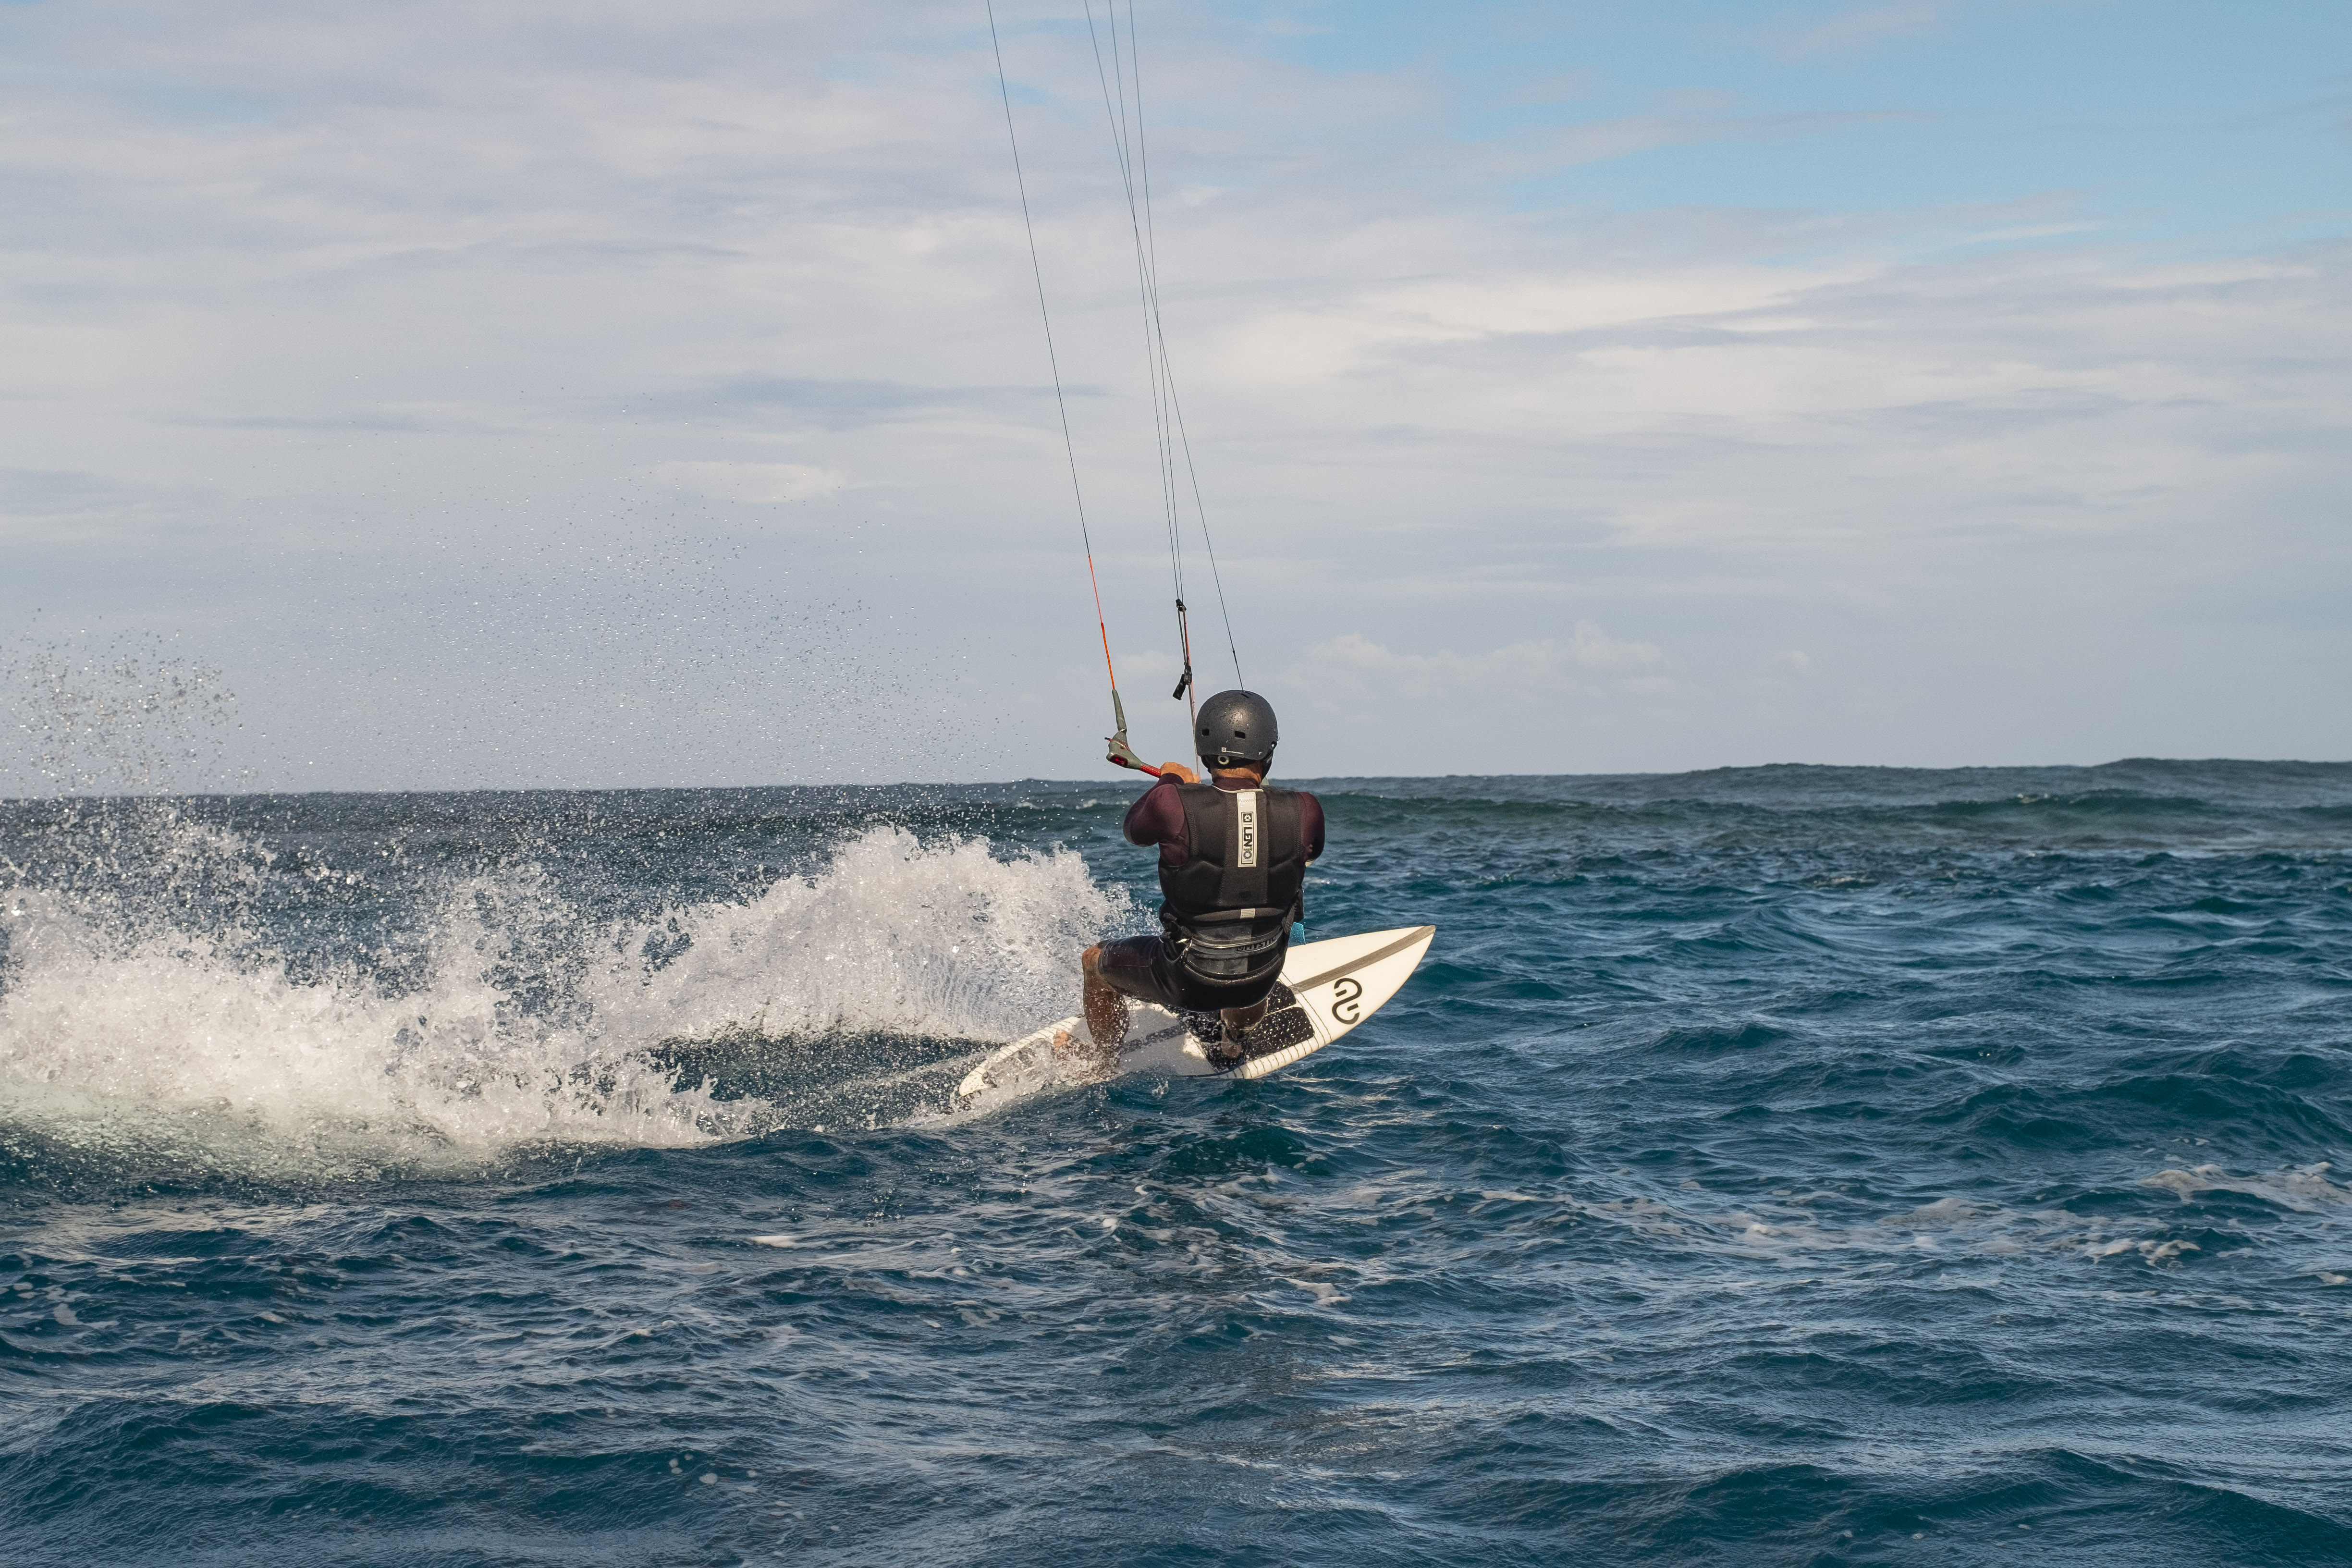 Enjoying some kitesurfing out on the reefs in Lord Howe.